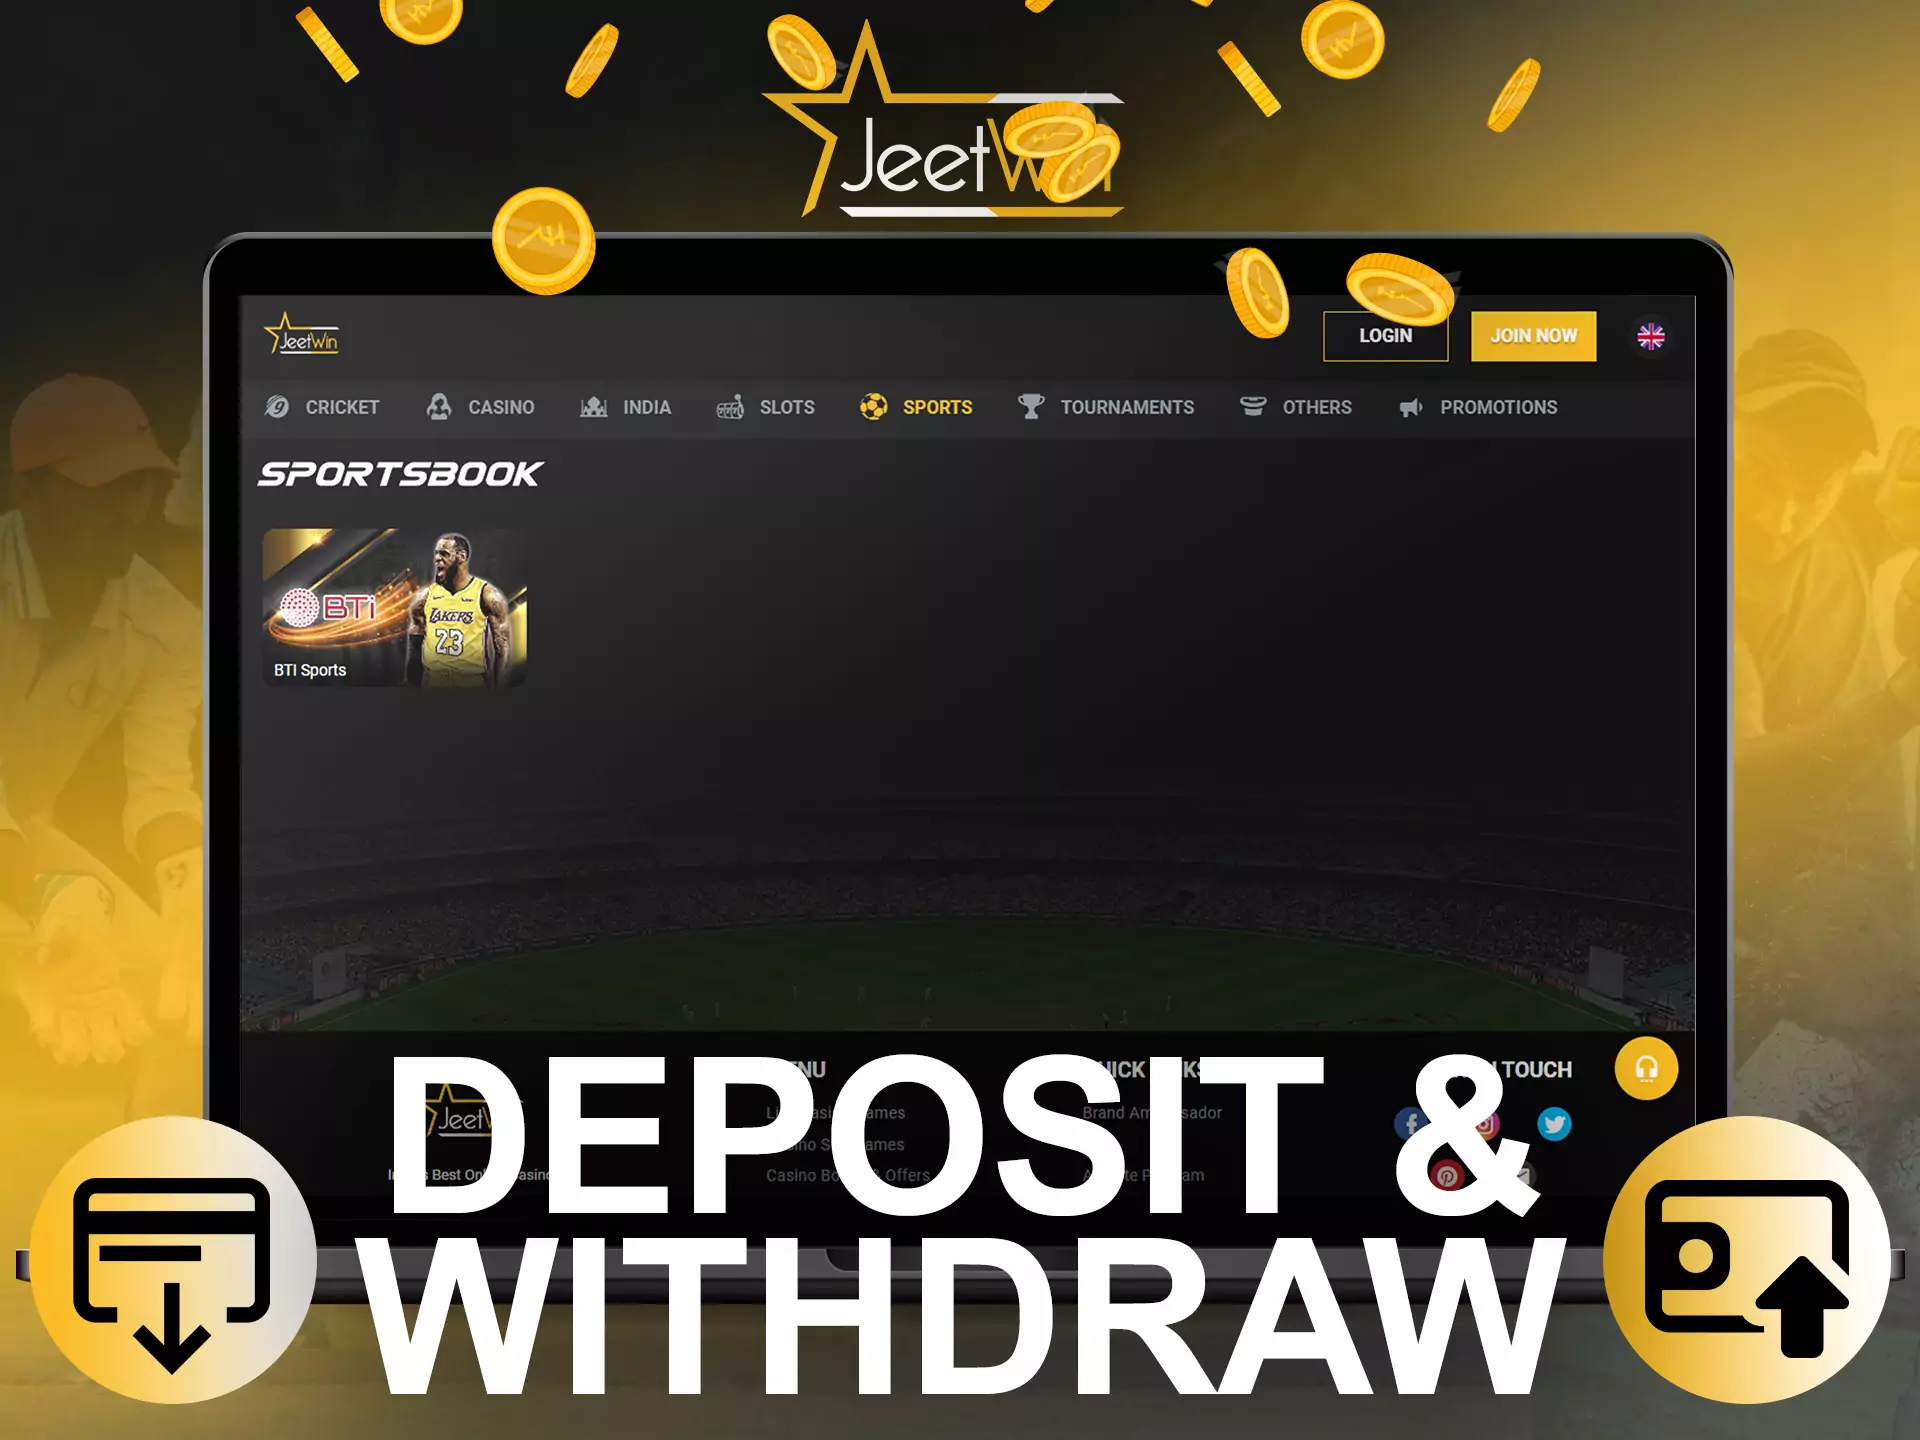 Find out how to deposit and withdraw money from JeetWin.